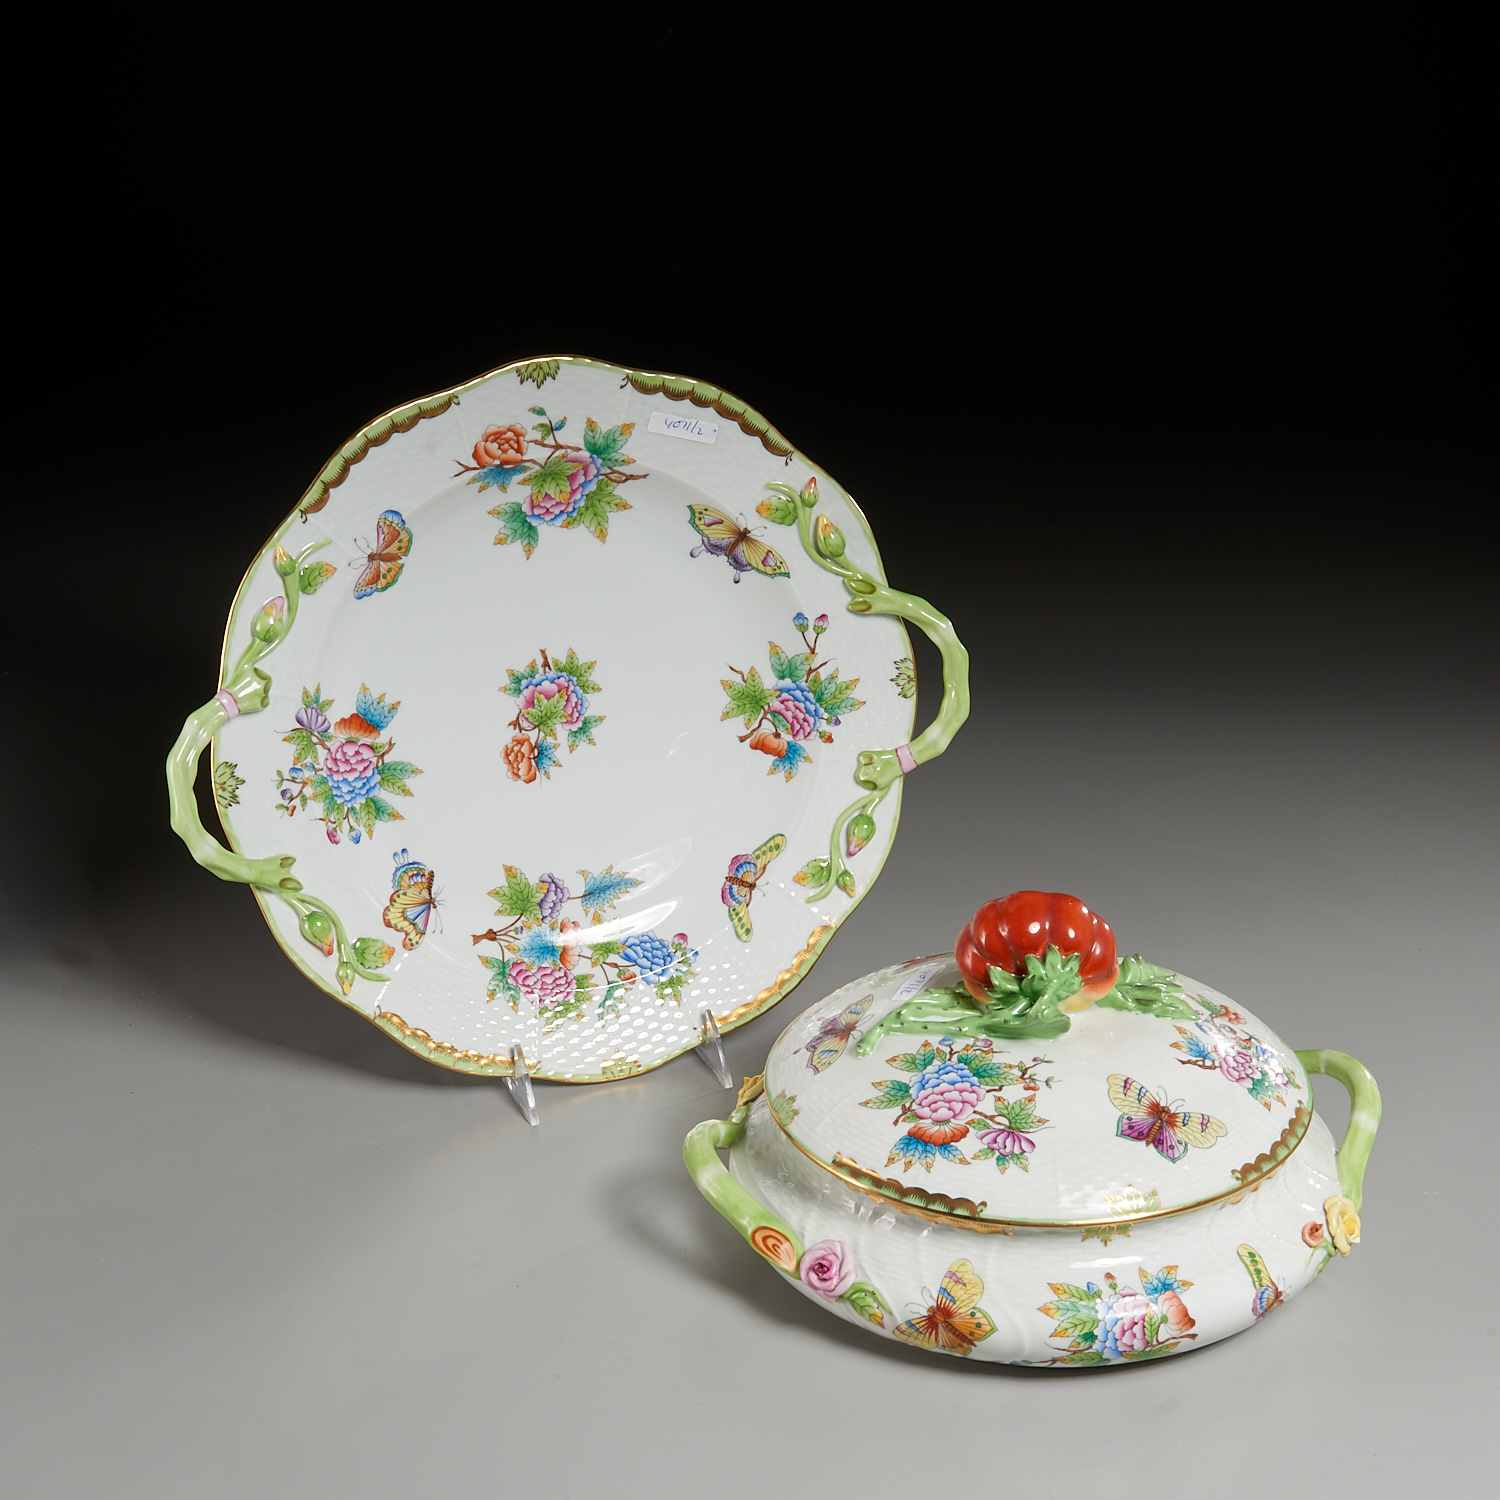 Herend Porcelain Tureen and Platter - Image 2 of 7